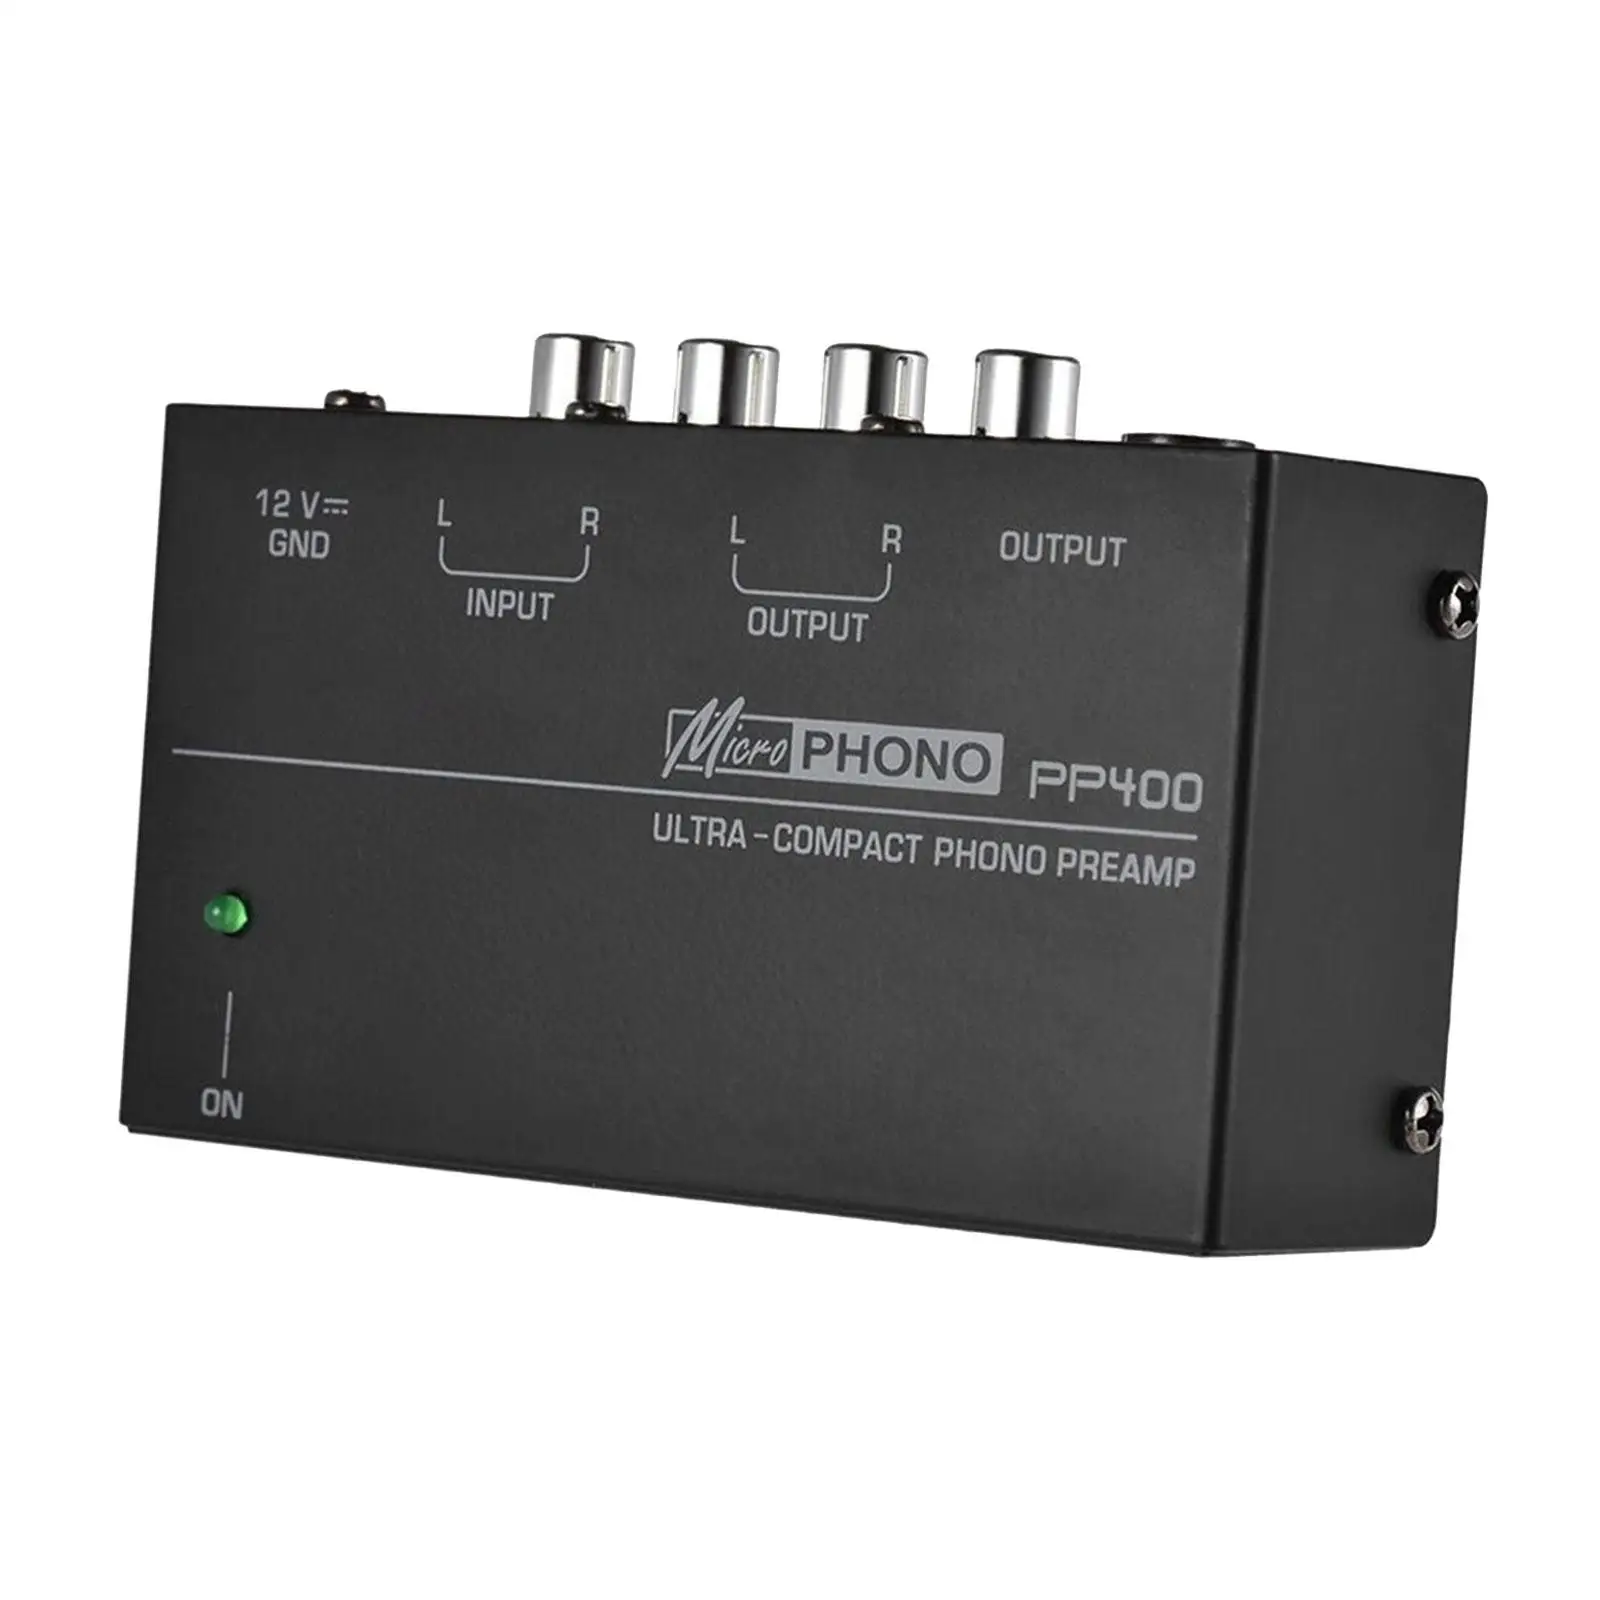 Turntable Amplifier DC 12V Audio Preamplifier Low Noise Operation Record Player Preamplifier Phono Preamp for Computers Speakers